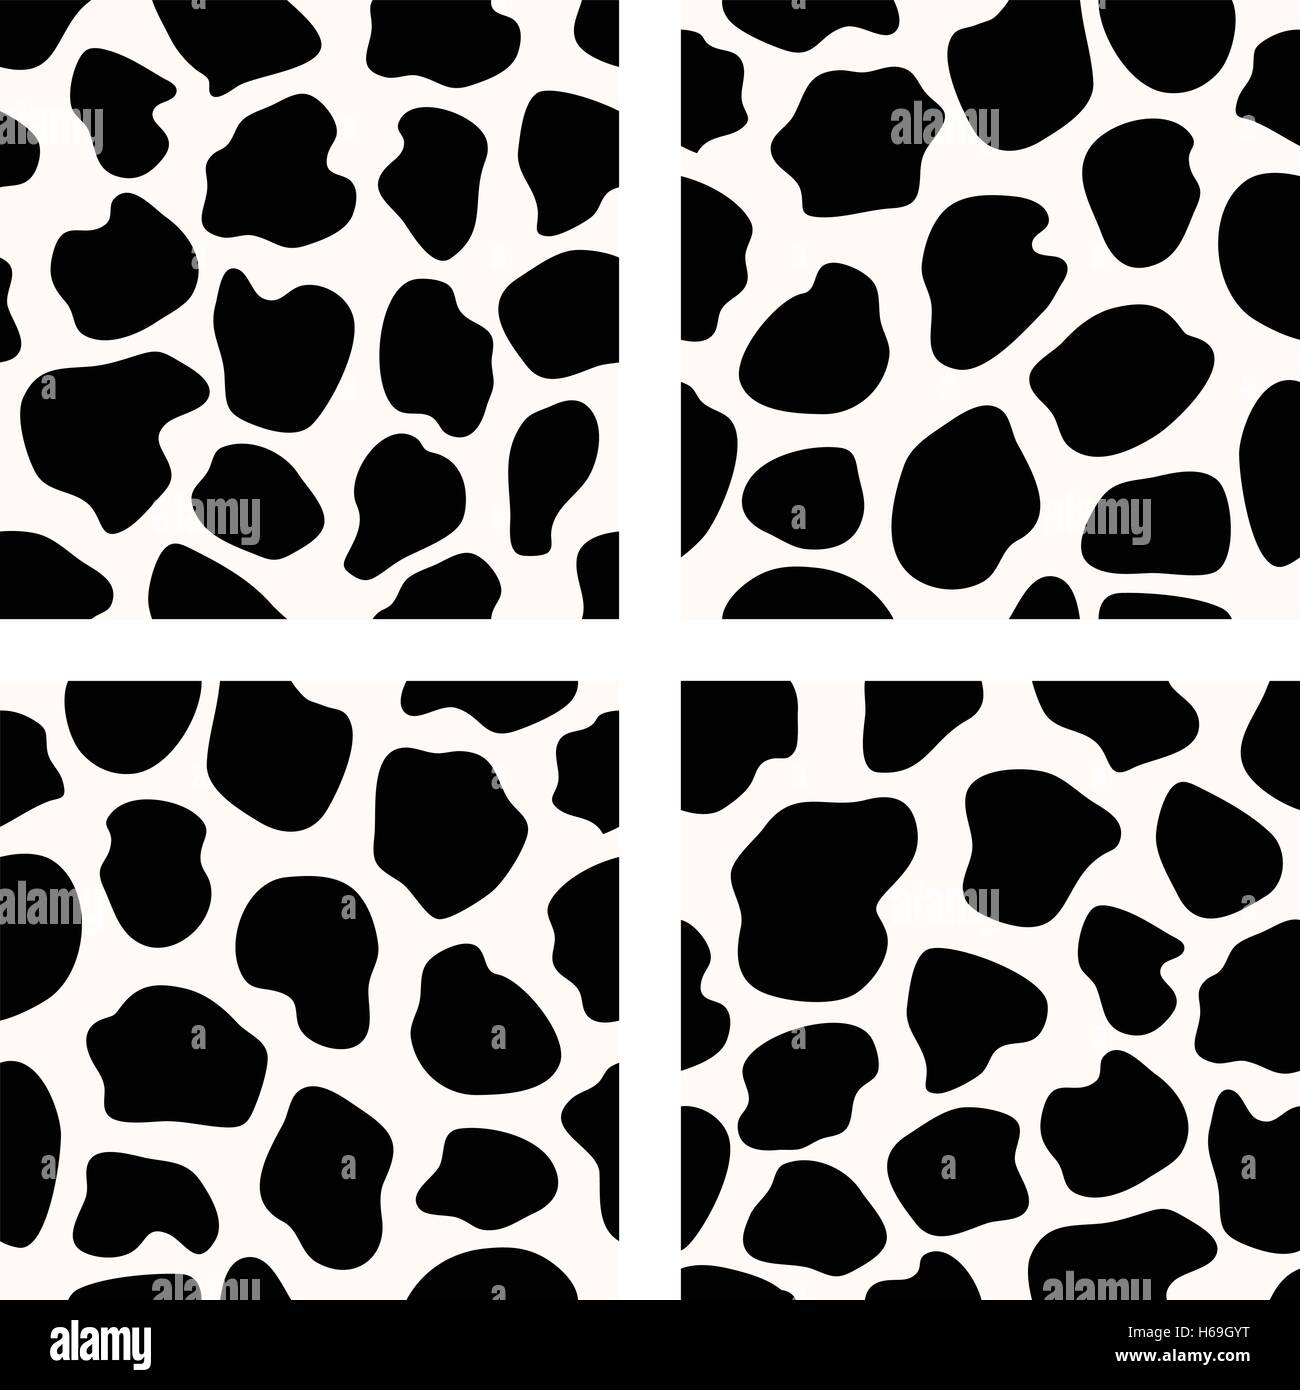 vector black and white set of seamless cow skin patterns Stock Vector